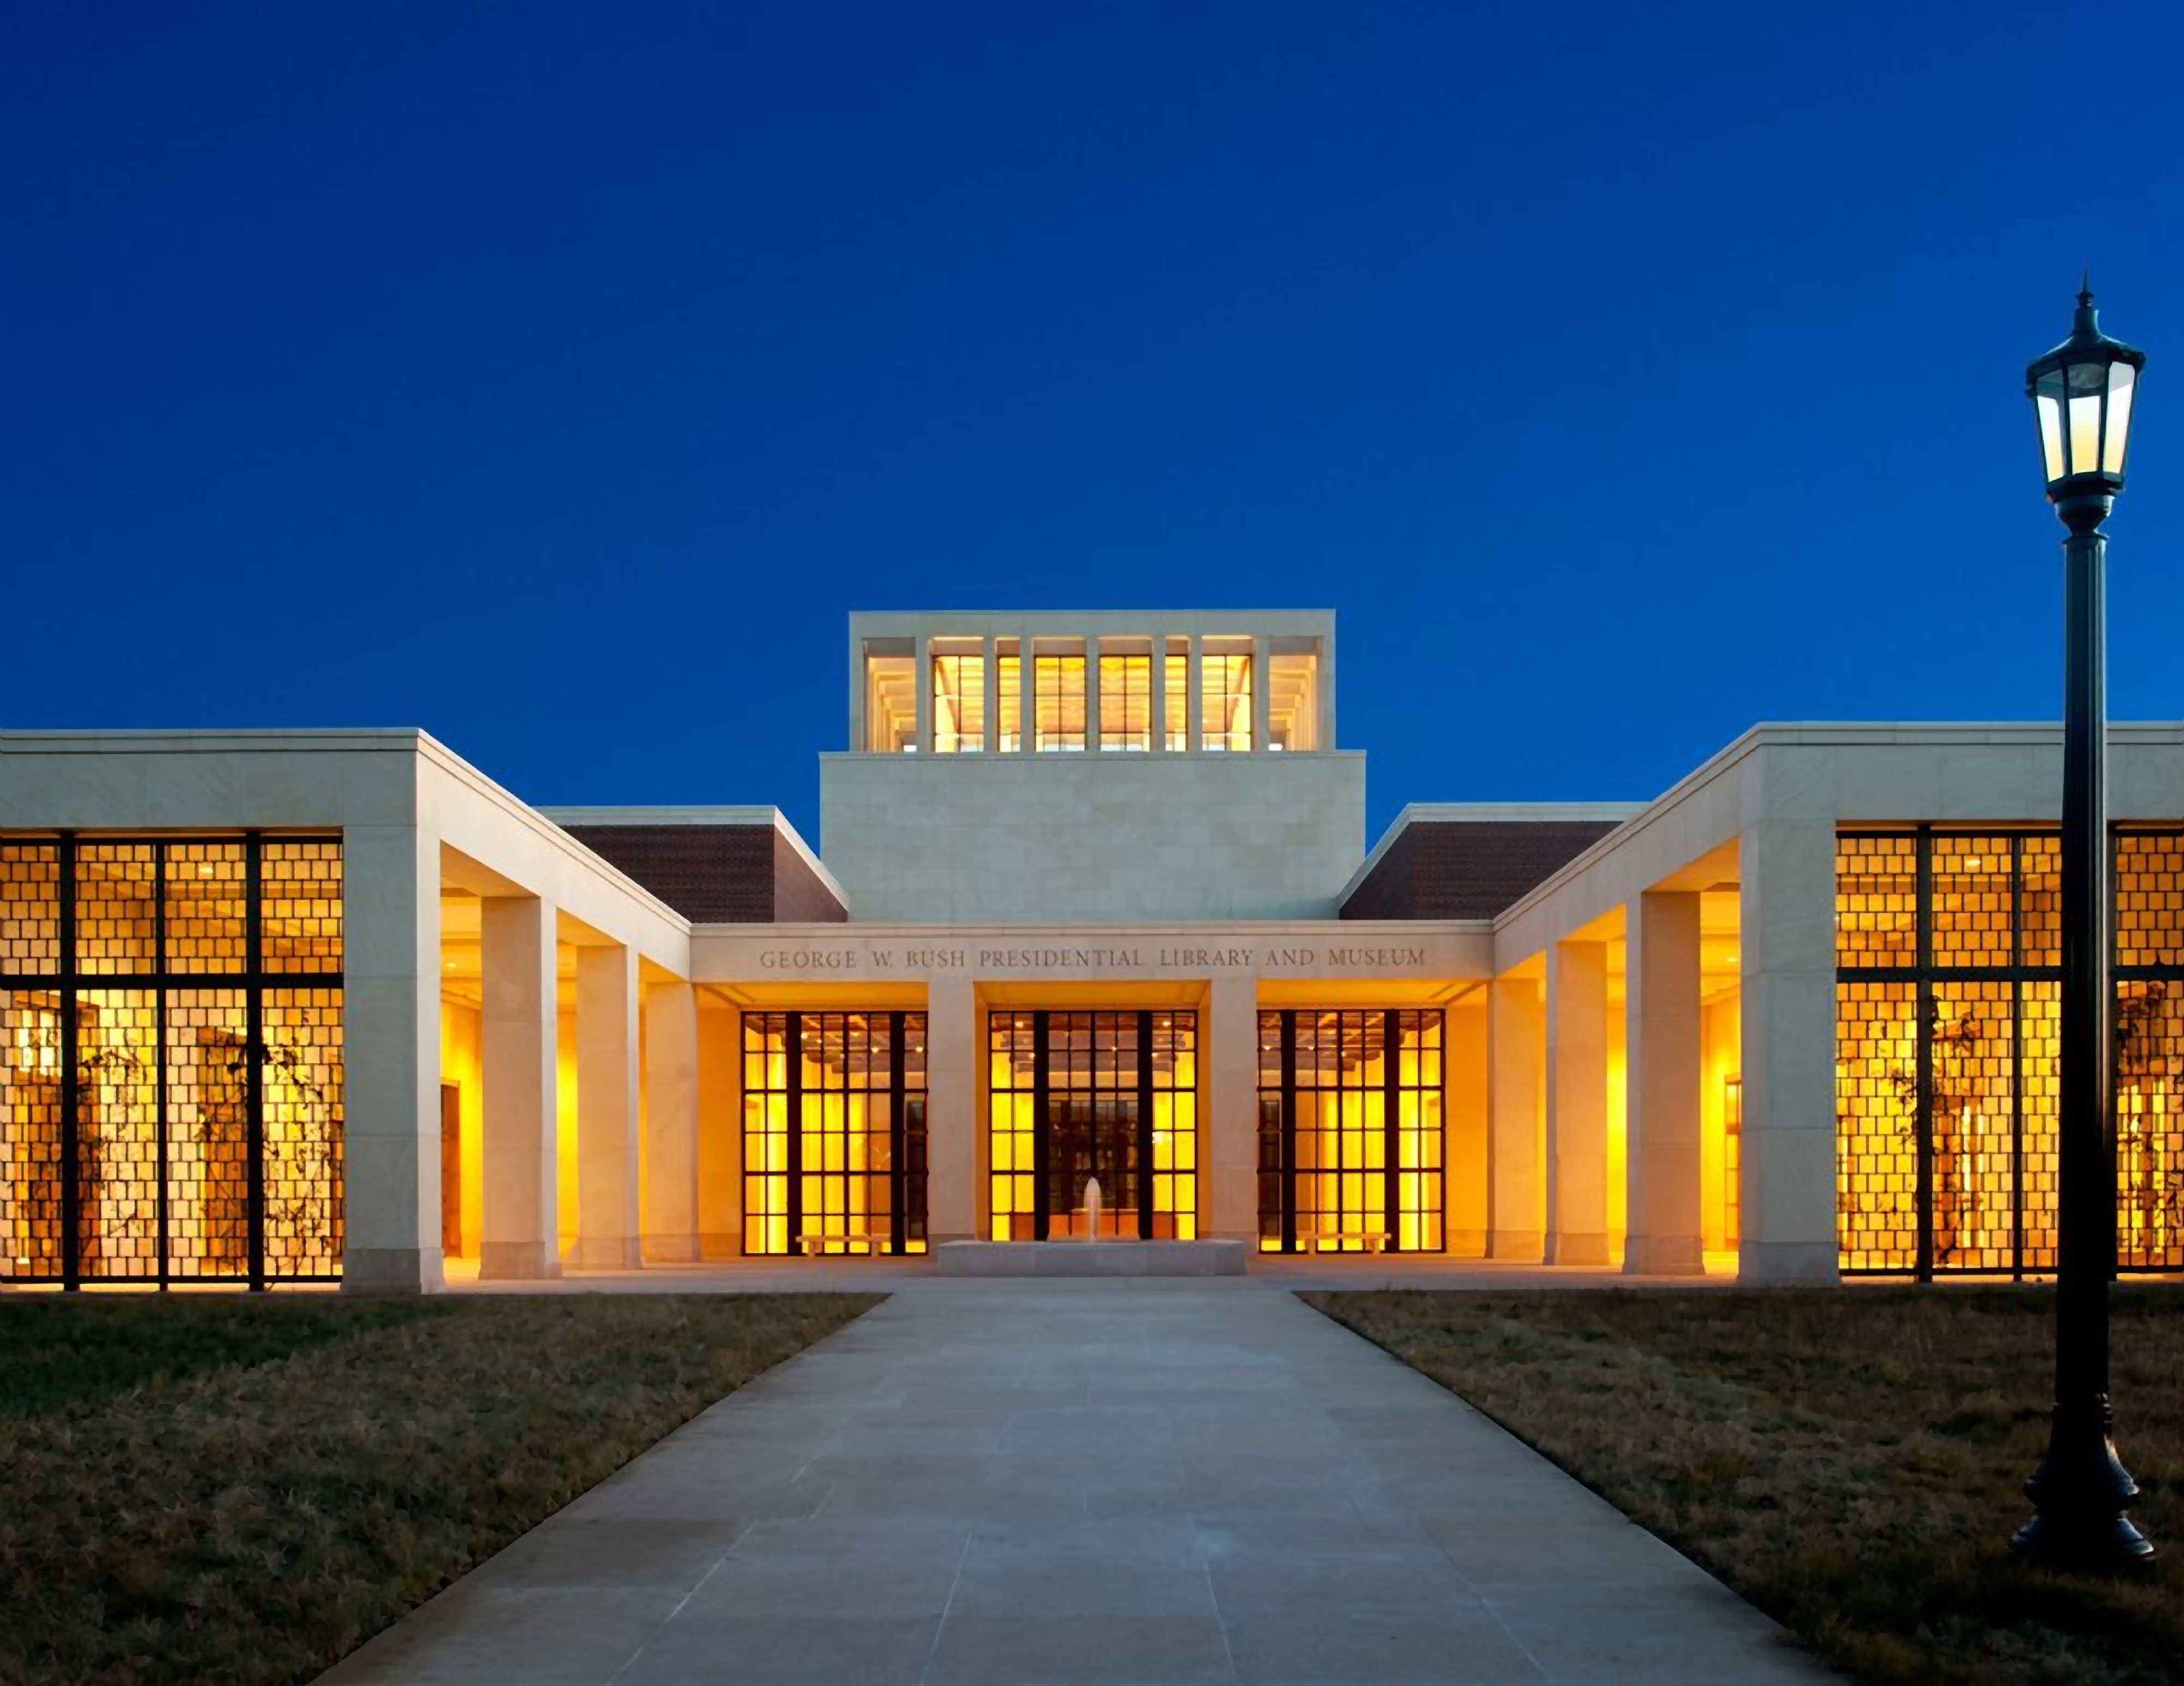 The front facade of the George W. Bush Presidential Center, as seen in the night